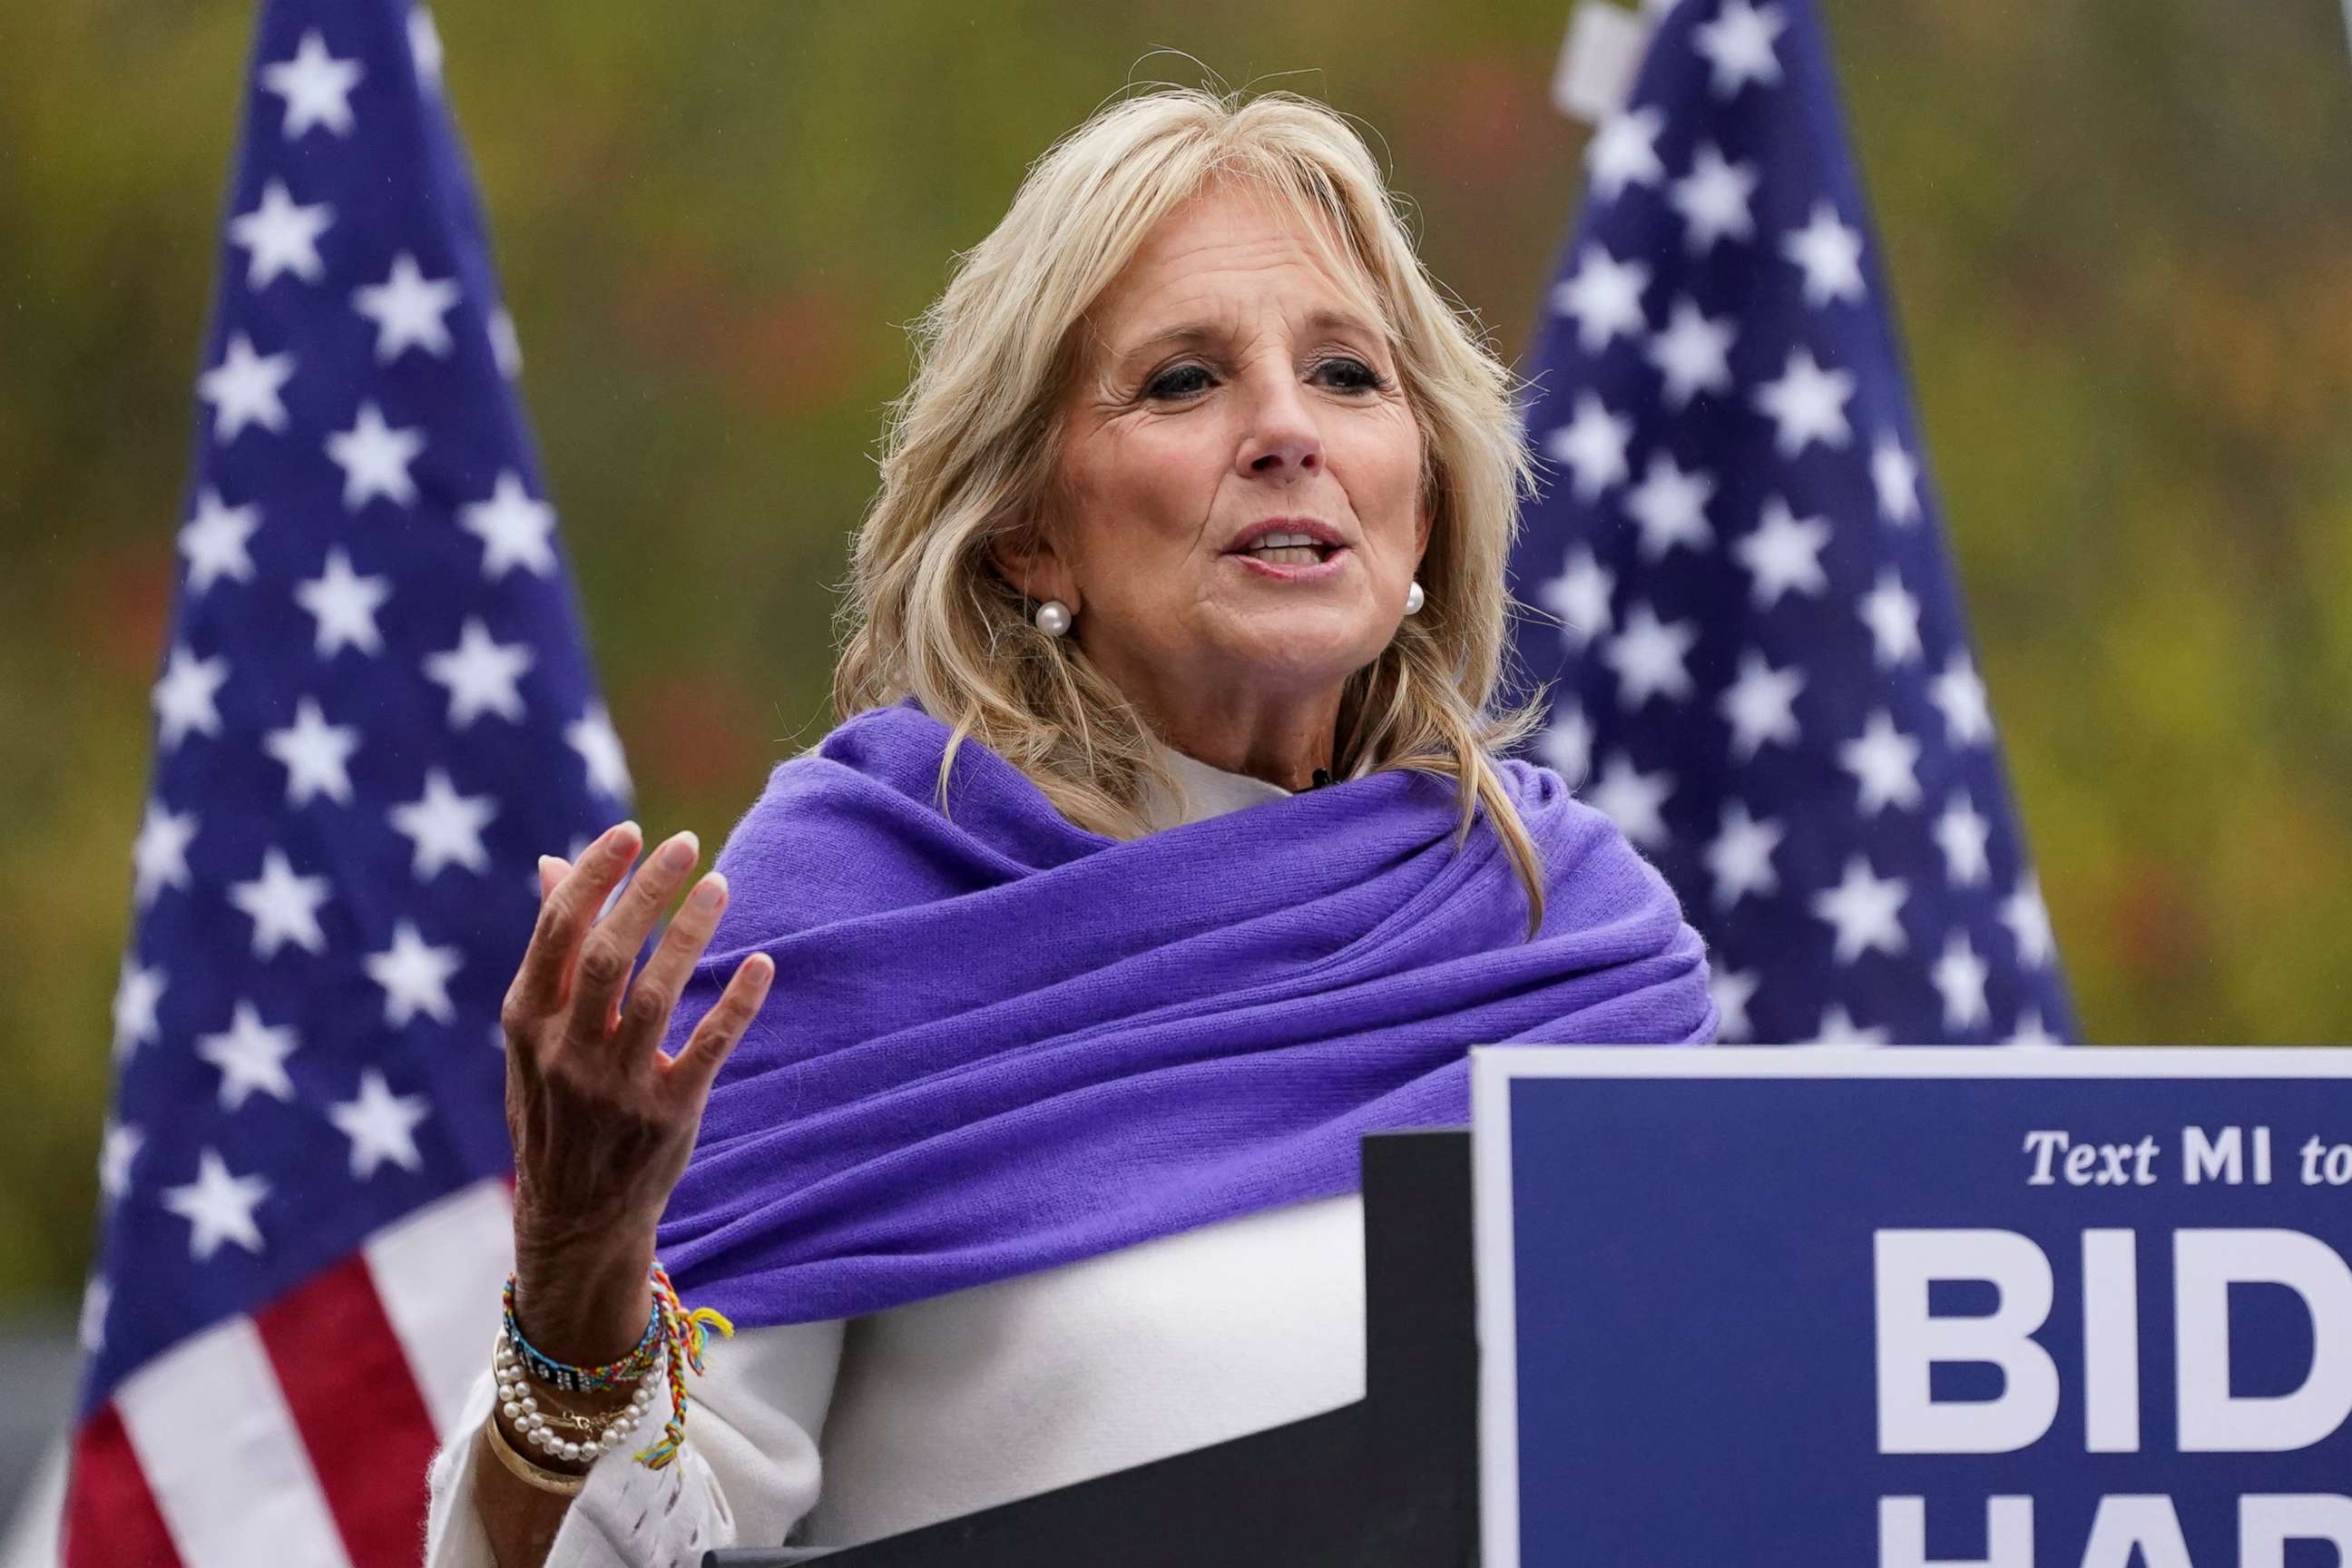 PHOTO: Jill Biden speaks to supporters while campaigning for her husband Democratic presidential candidate former Vice President Joe Biden, Oct. 29, 2020, in Westland, Mich.